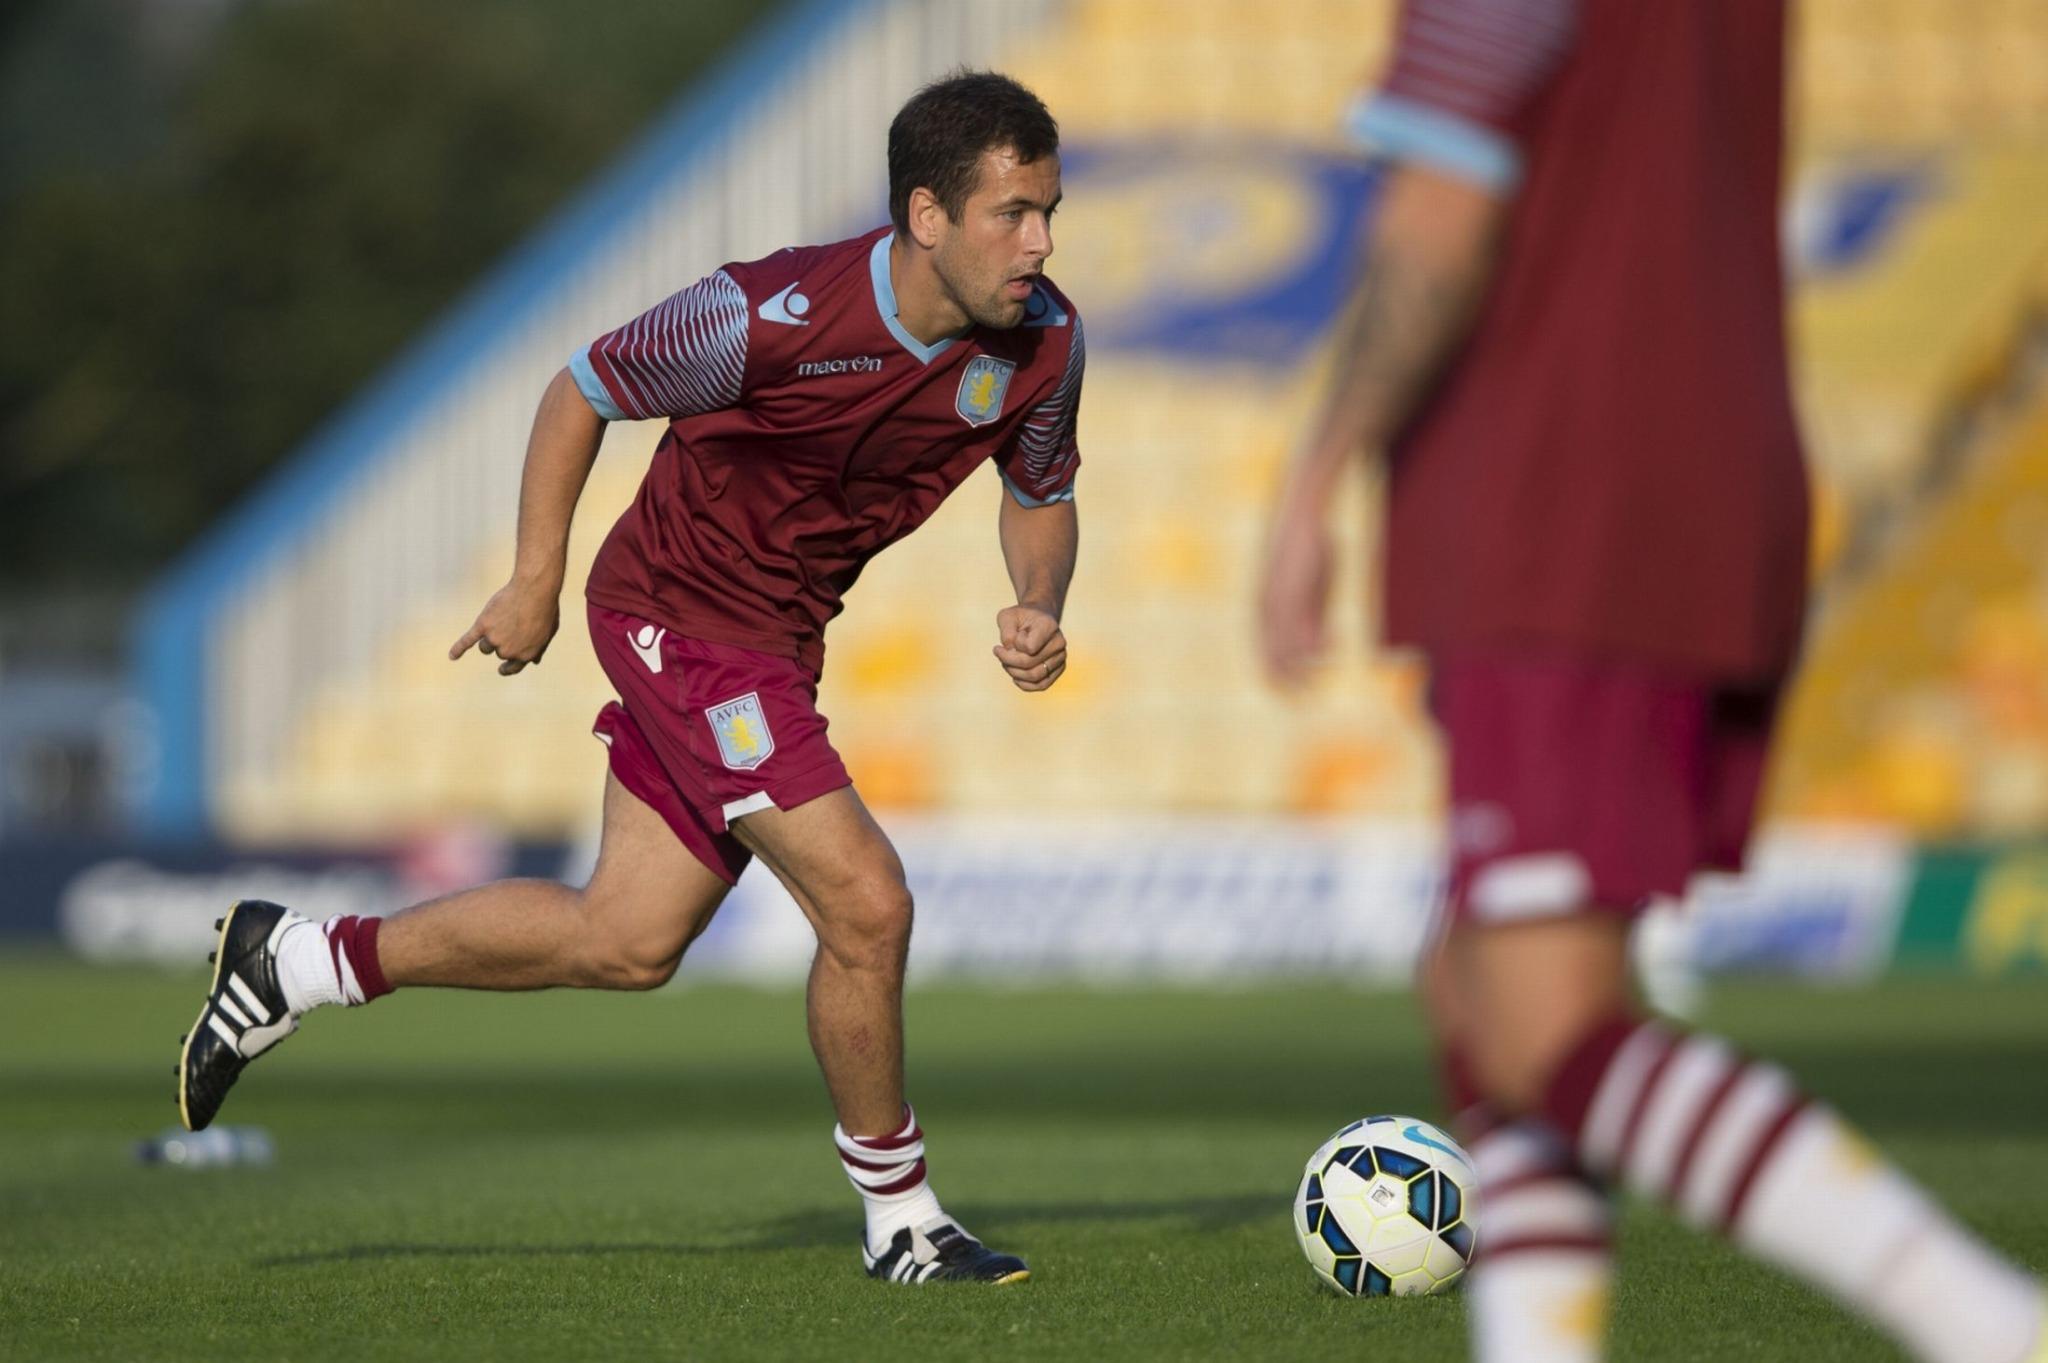 LP on Twitter: "Joe Cole + a pair Adidas Copa Mundials = already worth his  wages. #avfc http://t.co/GMjQiLHFkh" / Twitter